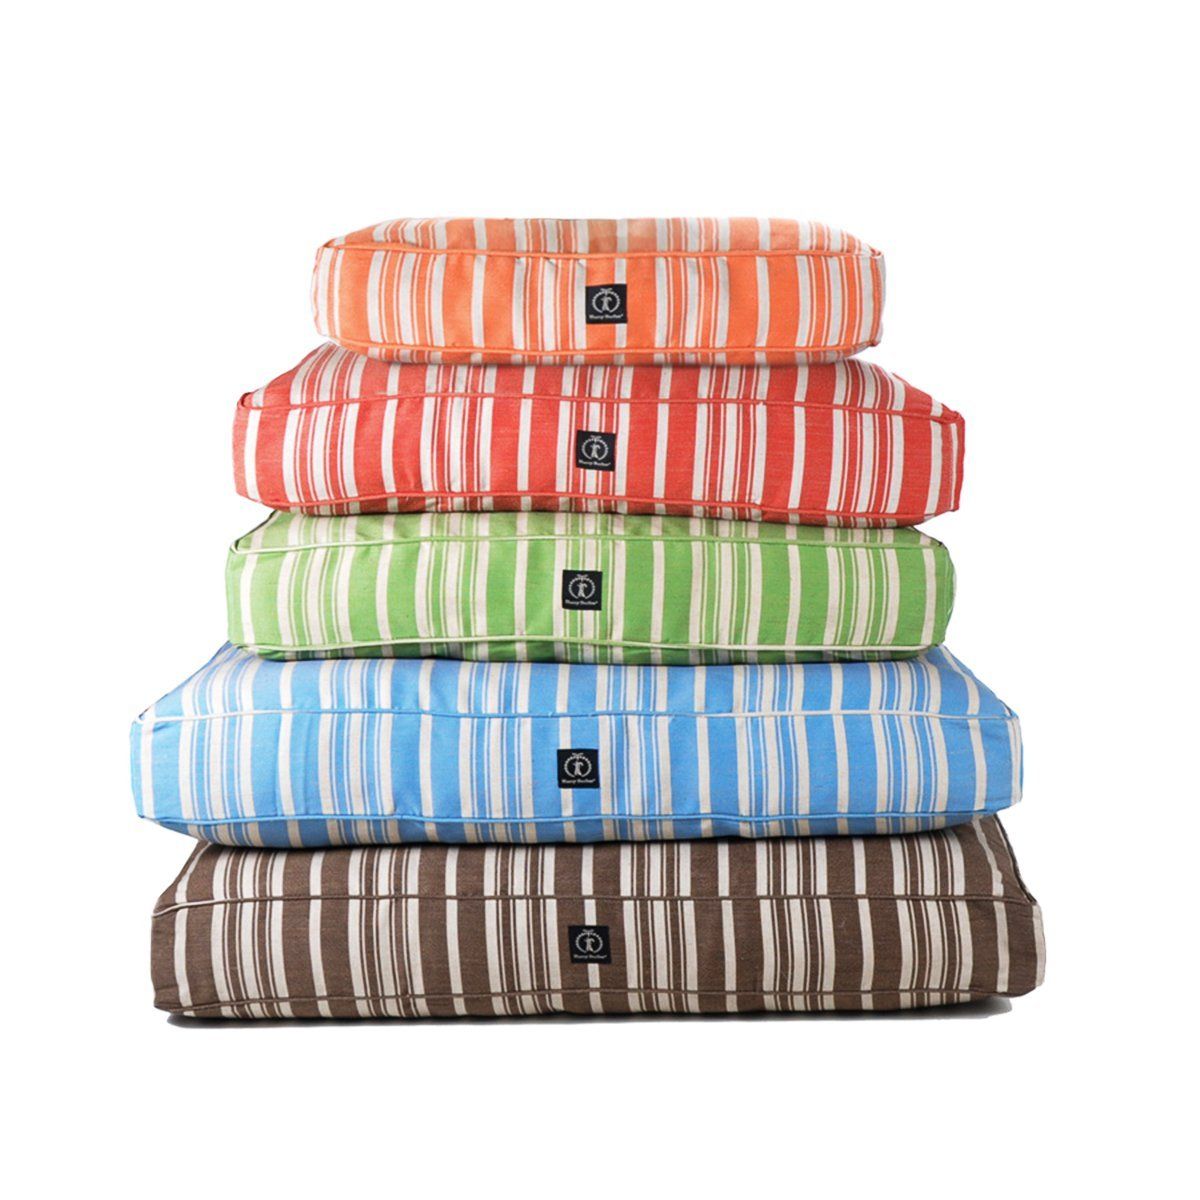 Classic Stripe Rectangle Dog Bed Cover